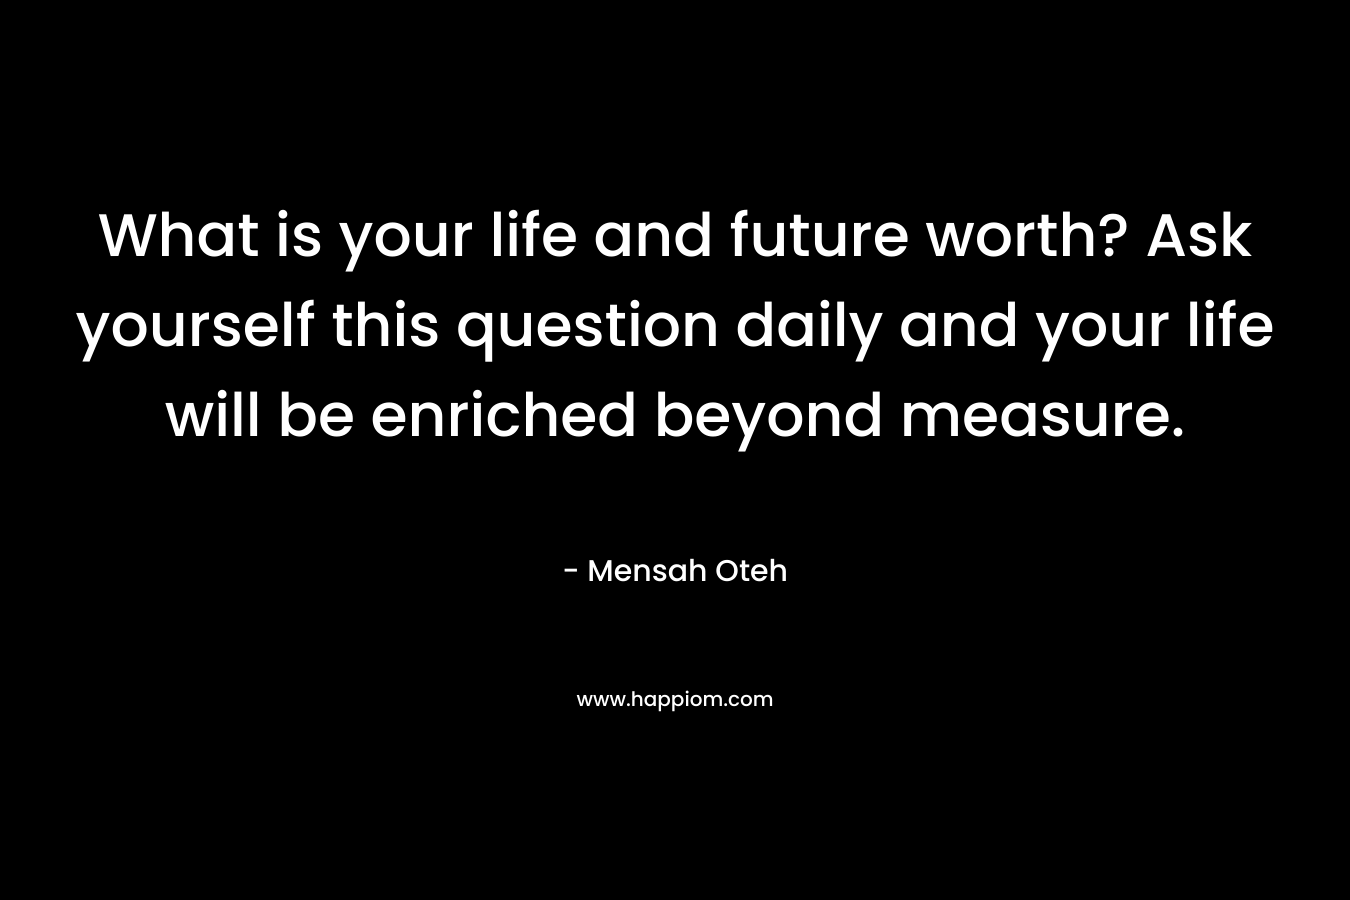 What is your life and future worth? Ask yourself this question daily and your life will be enriched beyond measure.